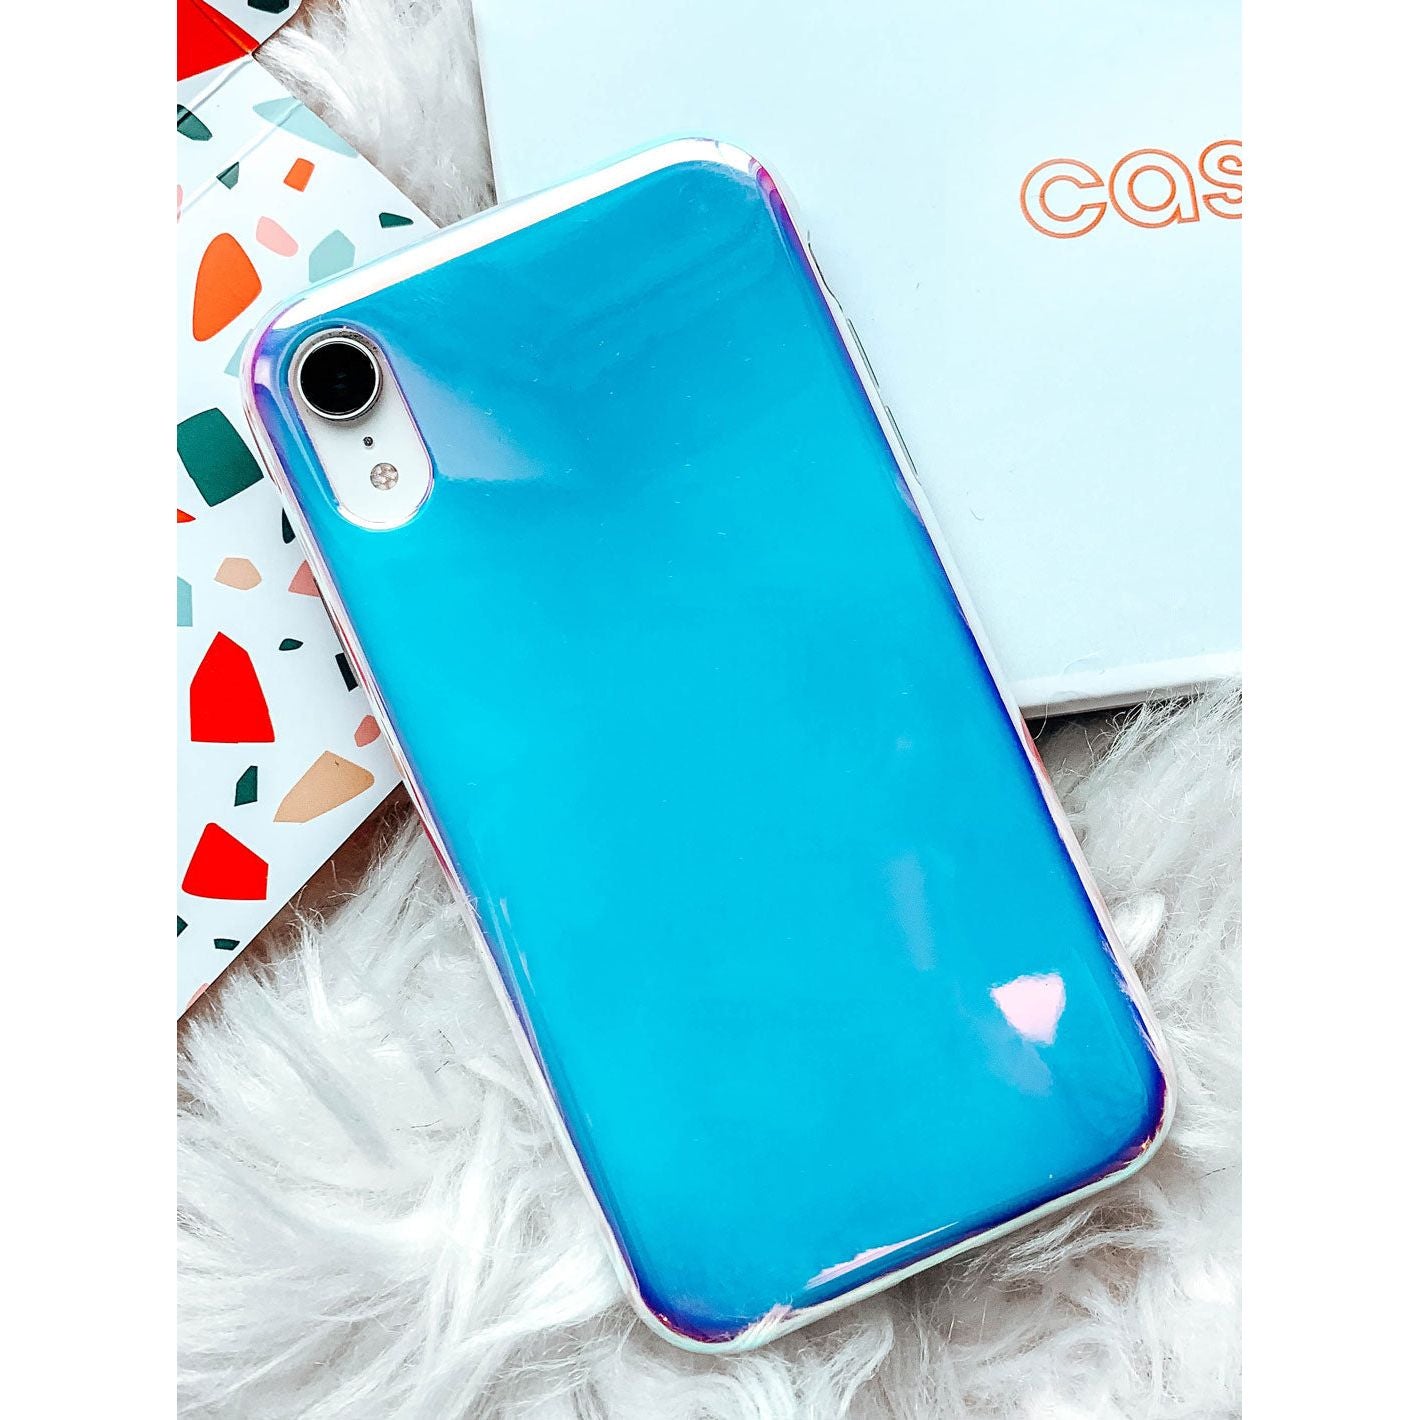 Cosmos Holographic iPhone Case   Phone Case - Case Warehouse